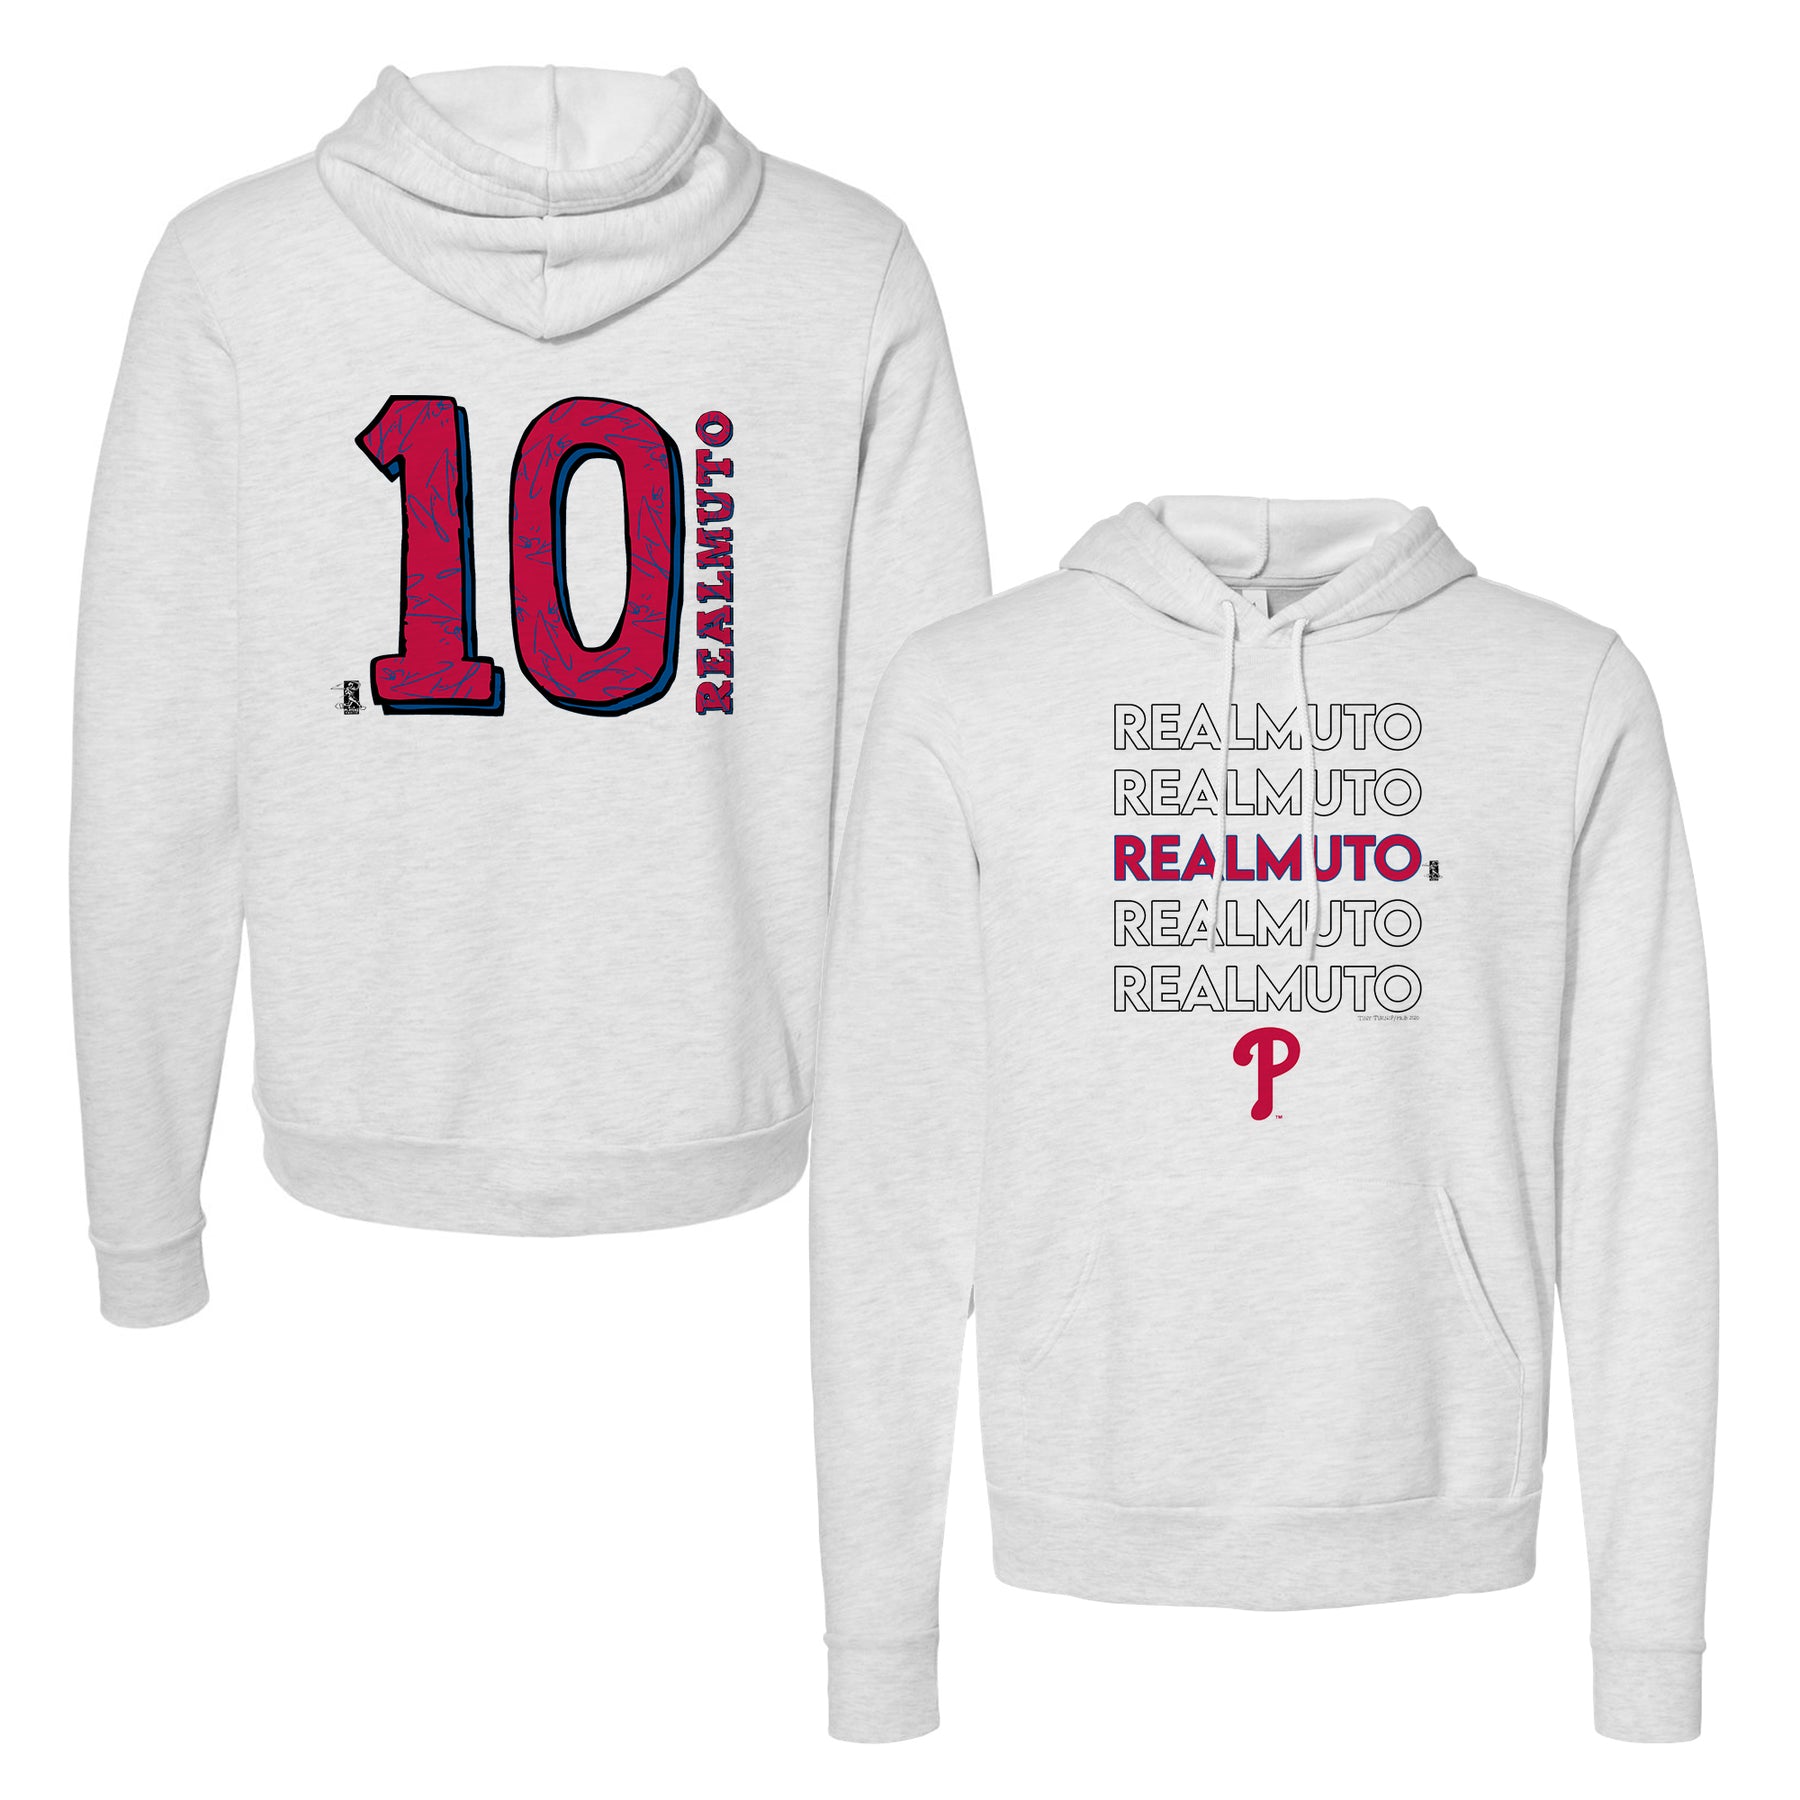 Jt Realmuto Gifts & Merchandise for Sale